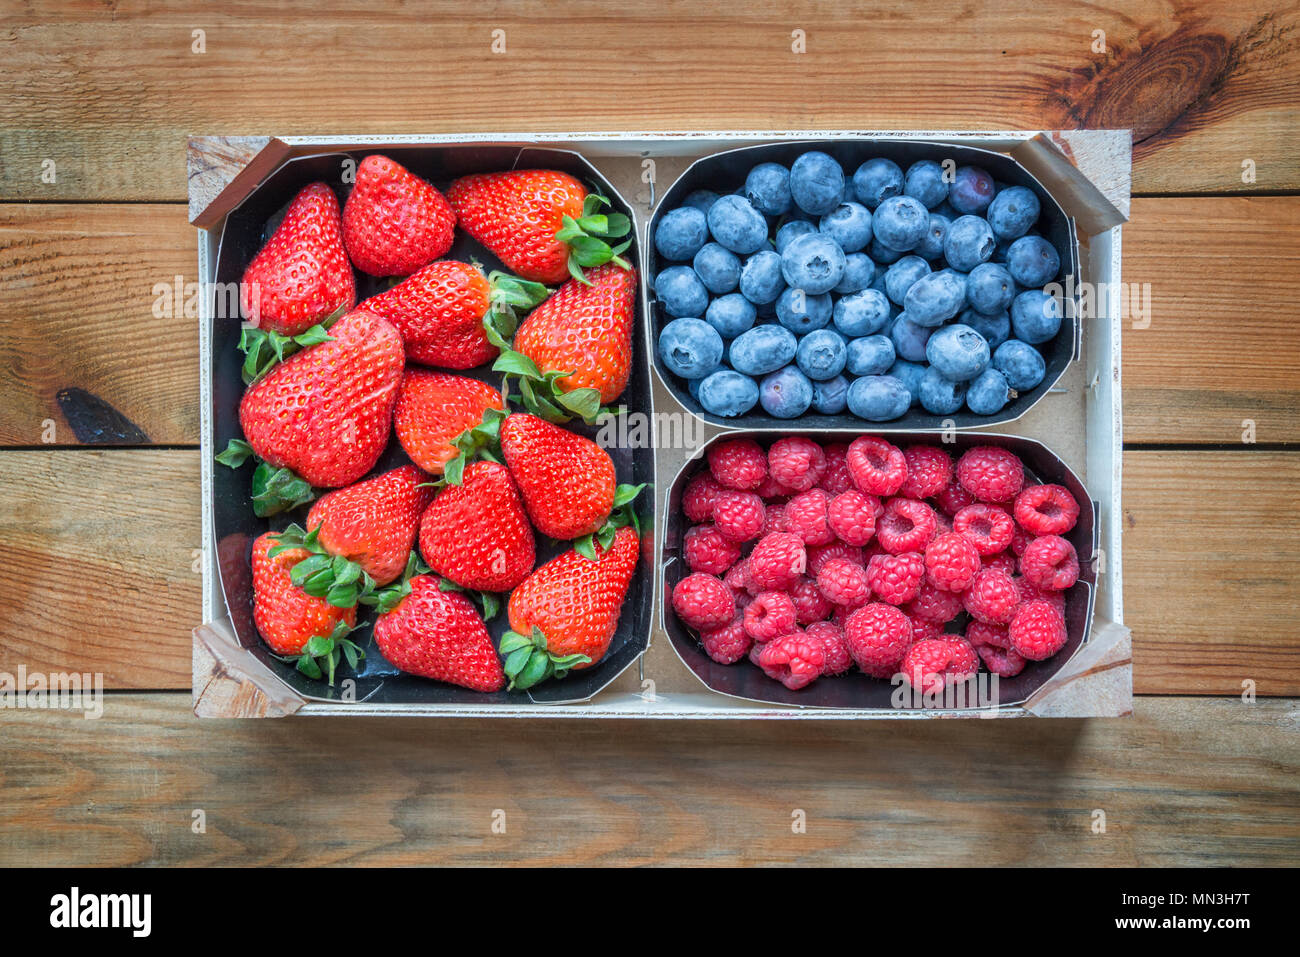 Mix of organic berries. Baskets of fresh raspberries, blueberries,strawberries on wooden table, top view Stock Photo